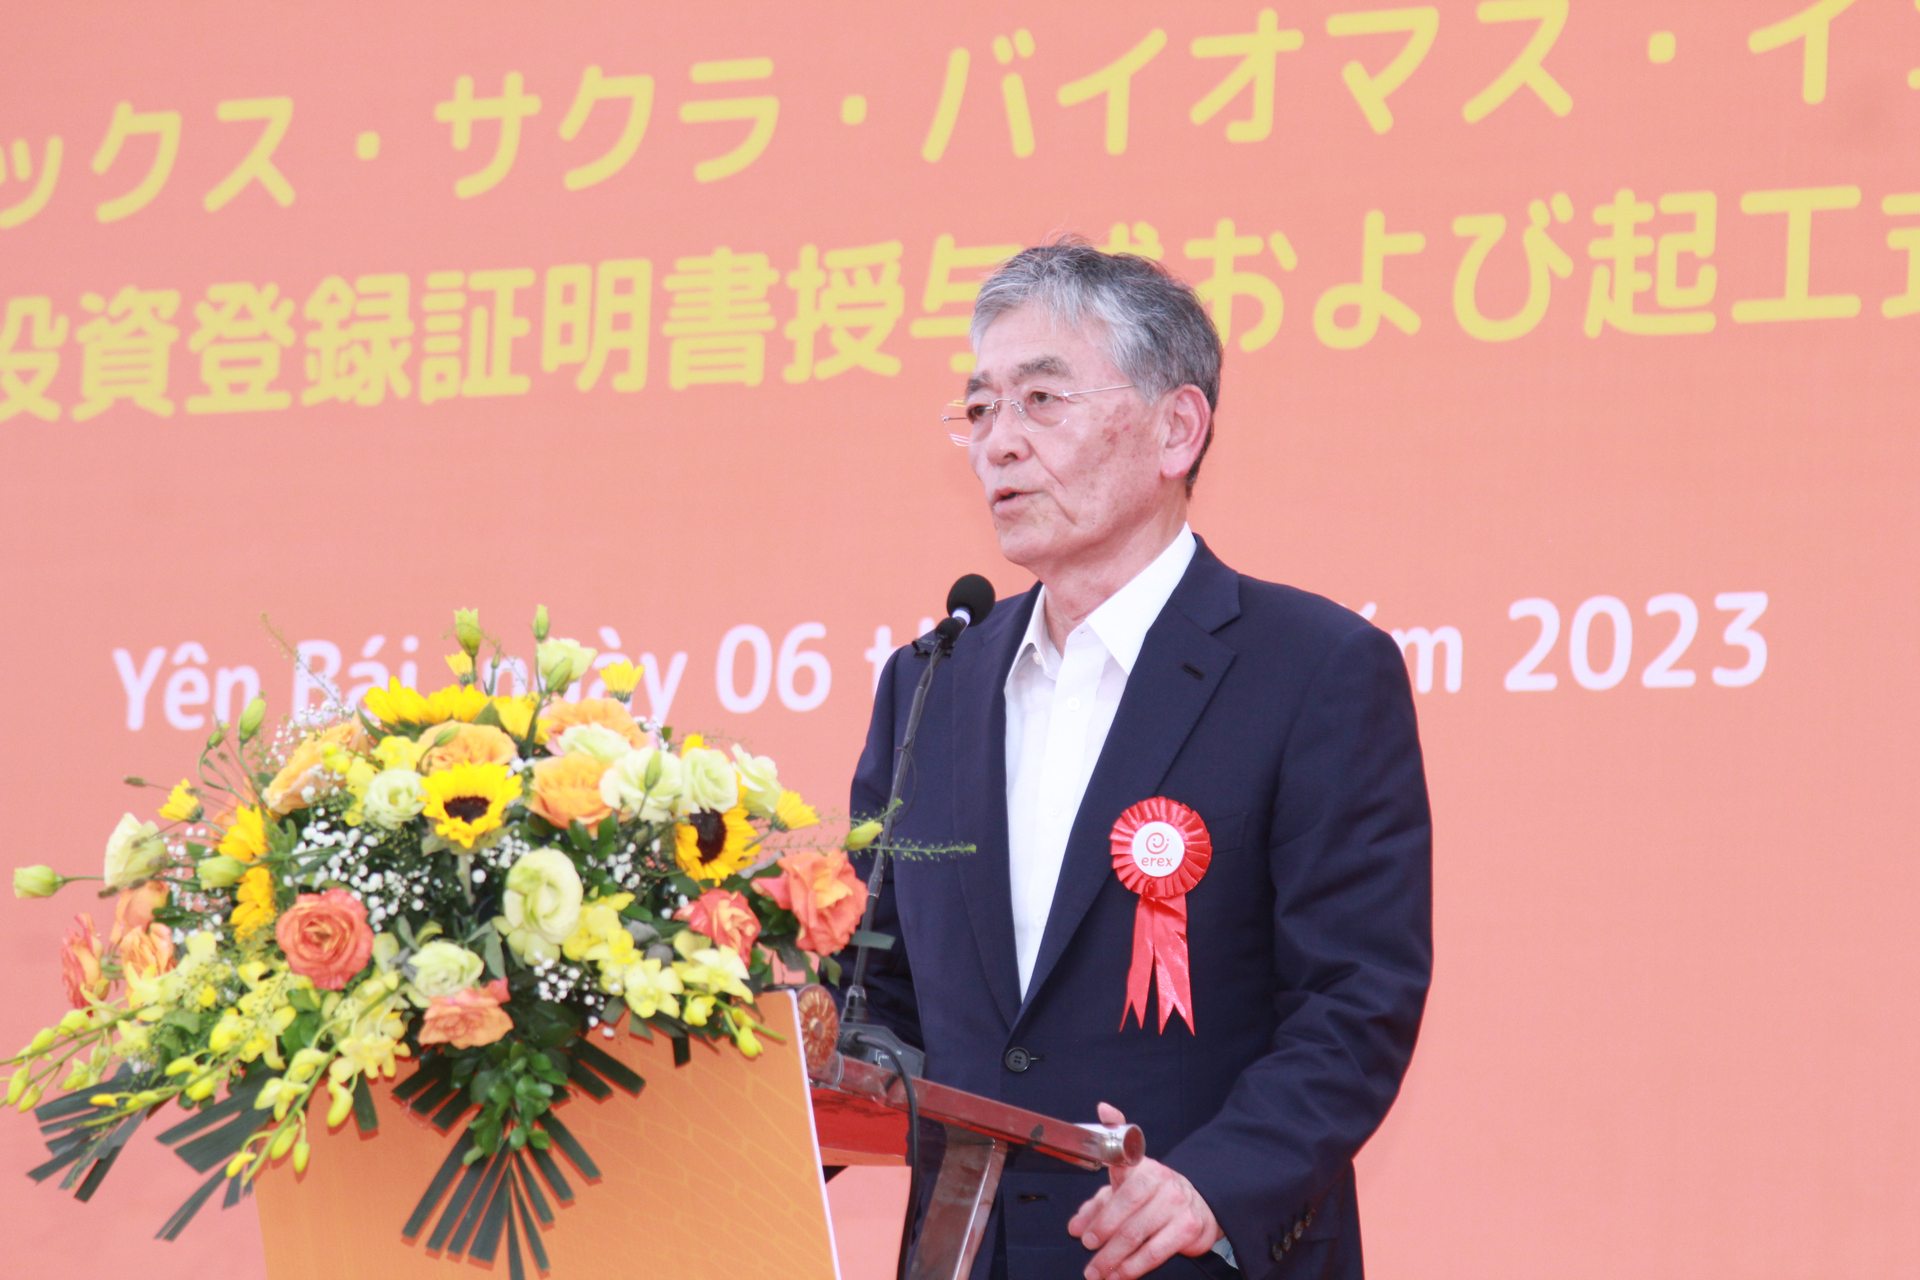 Mr. Honna Hitoshi - Chairman and General Director of EREX Joint Stock Company at the groudbreaking ceremony. Photo: Thanh Tien.